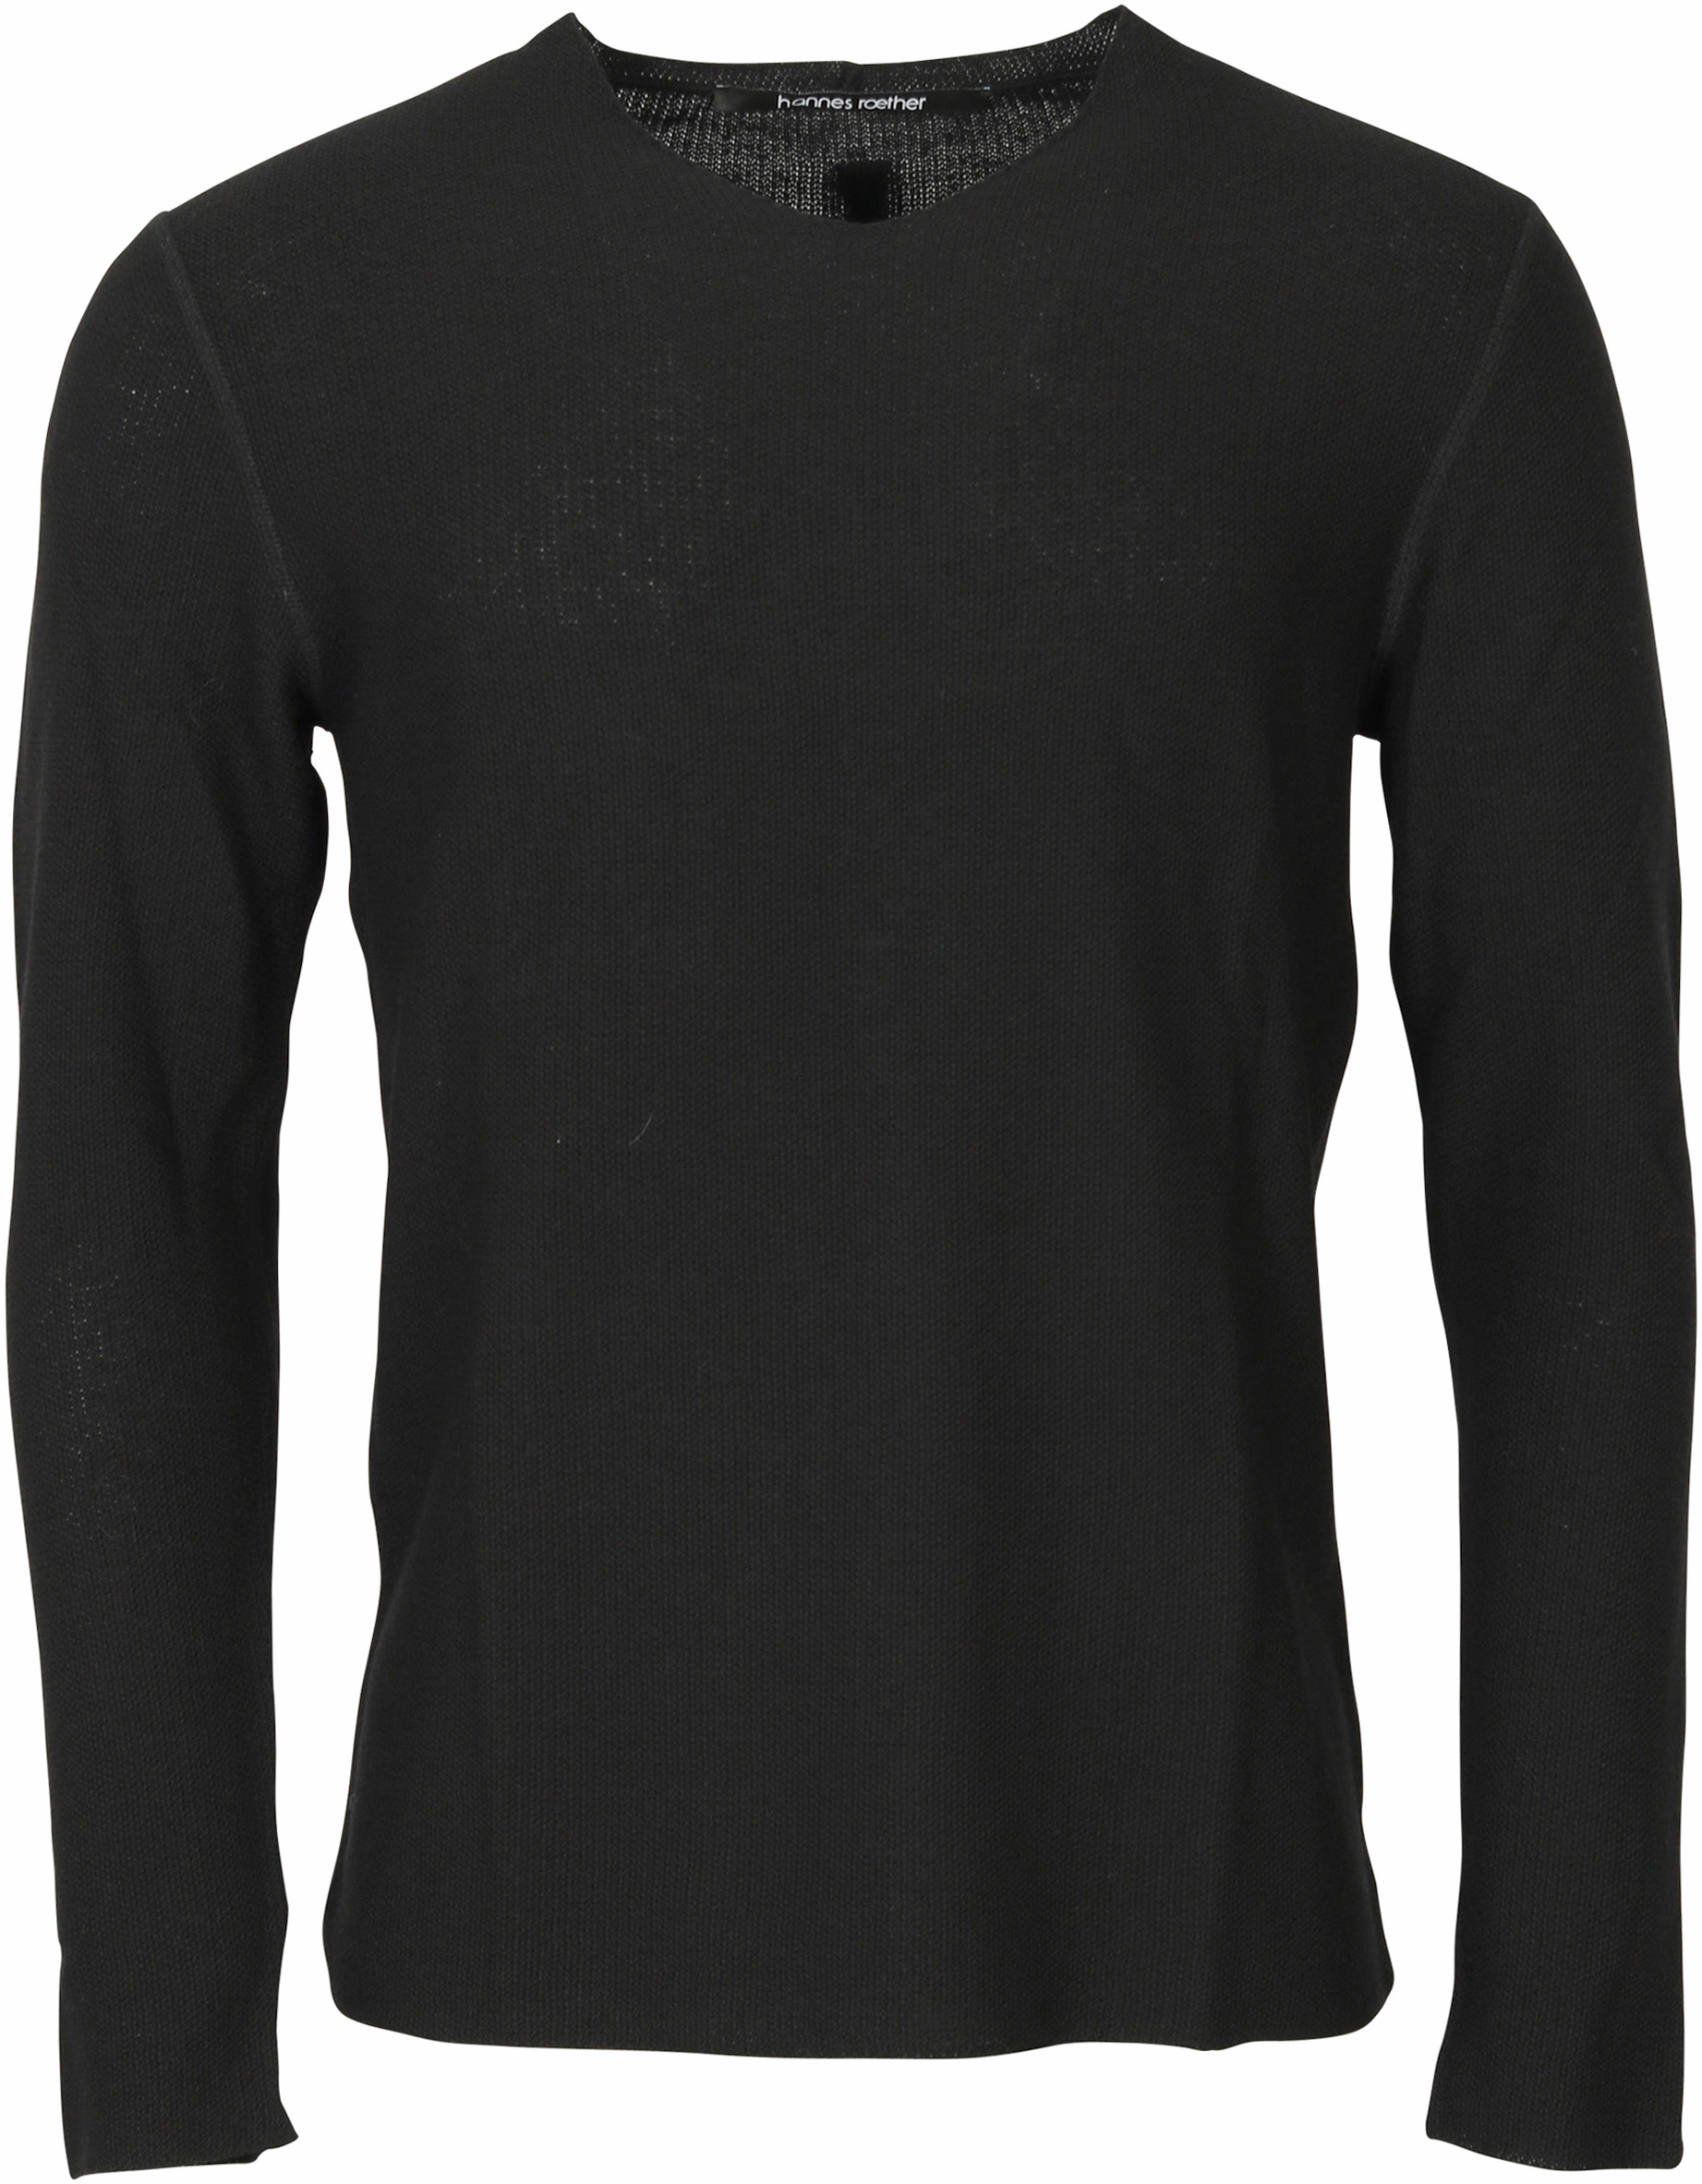 Hannes Roether Pullover Black